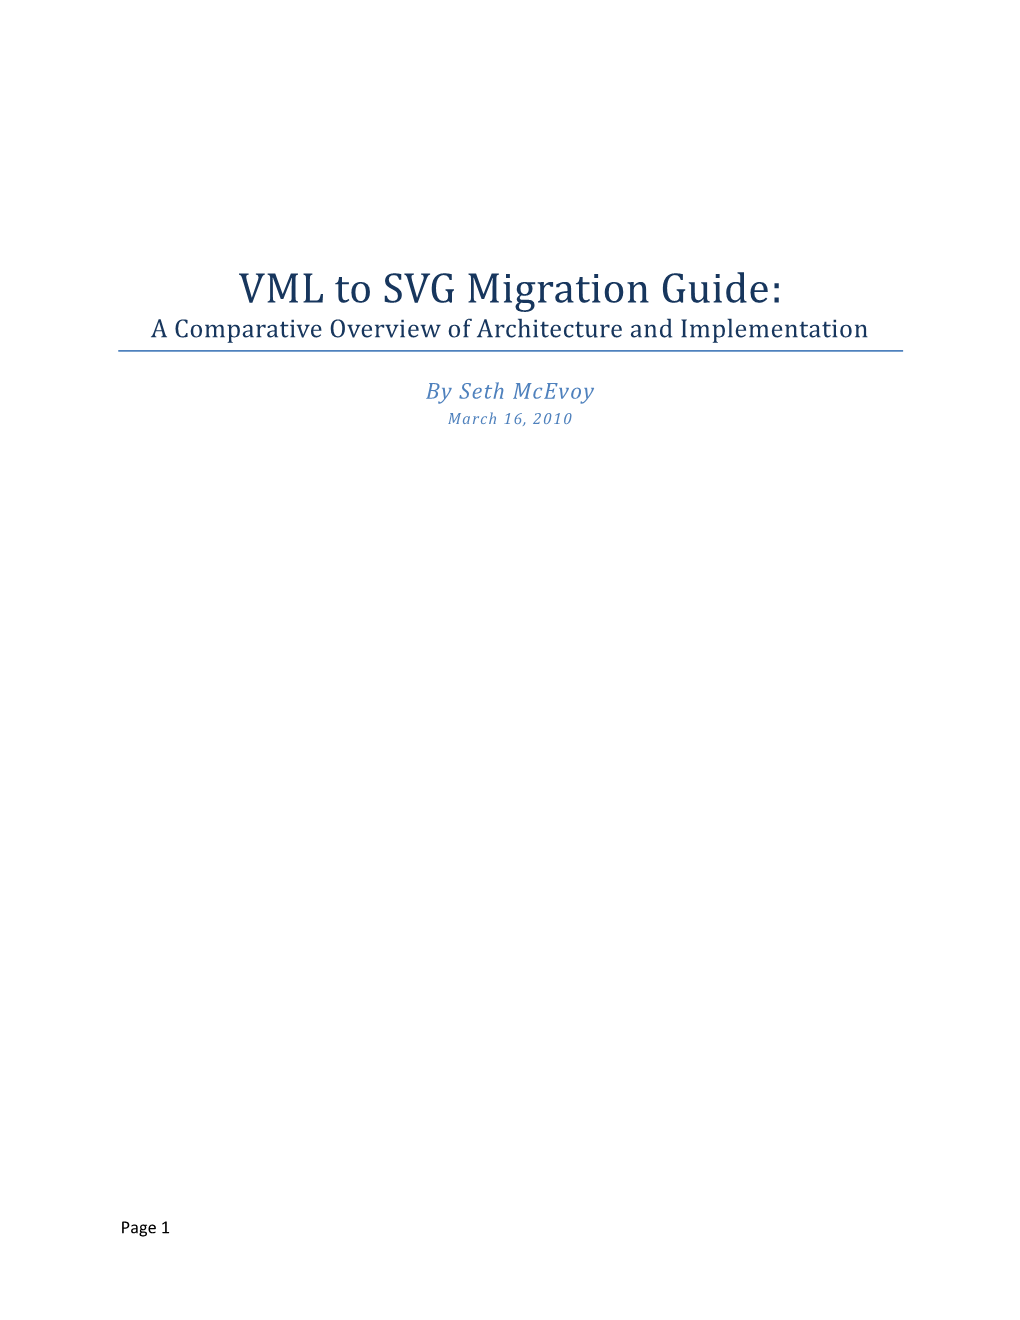 VML to SVG Migration Guide: a Comparative Overview of Architecture and Implementation